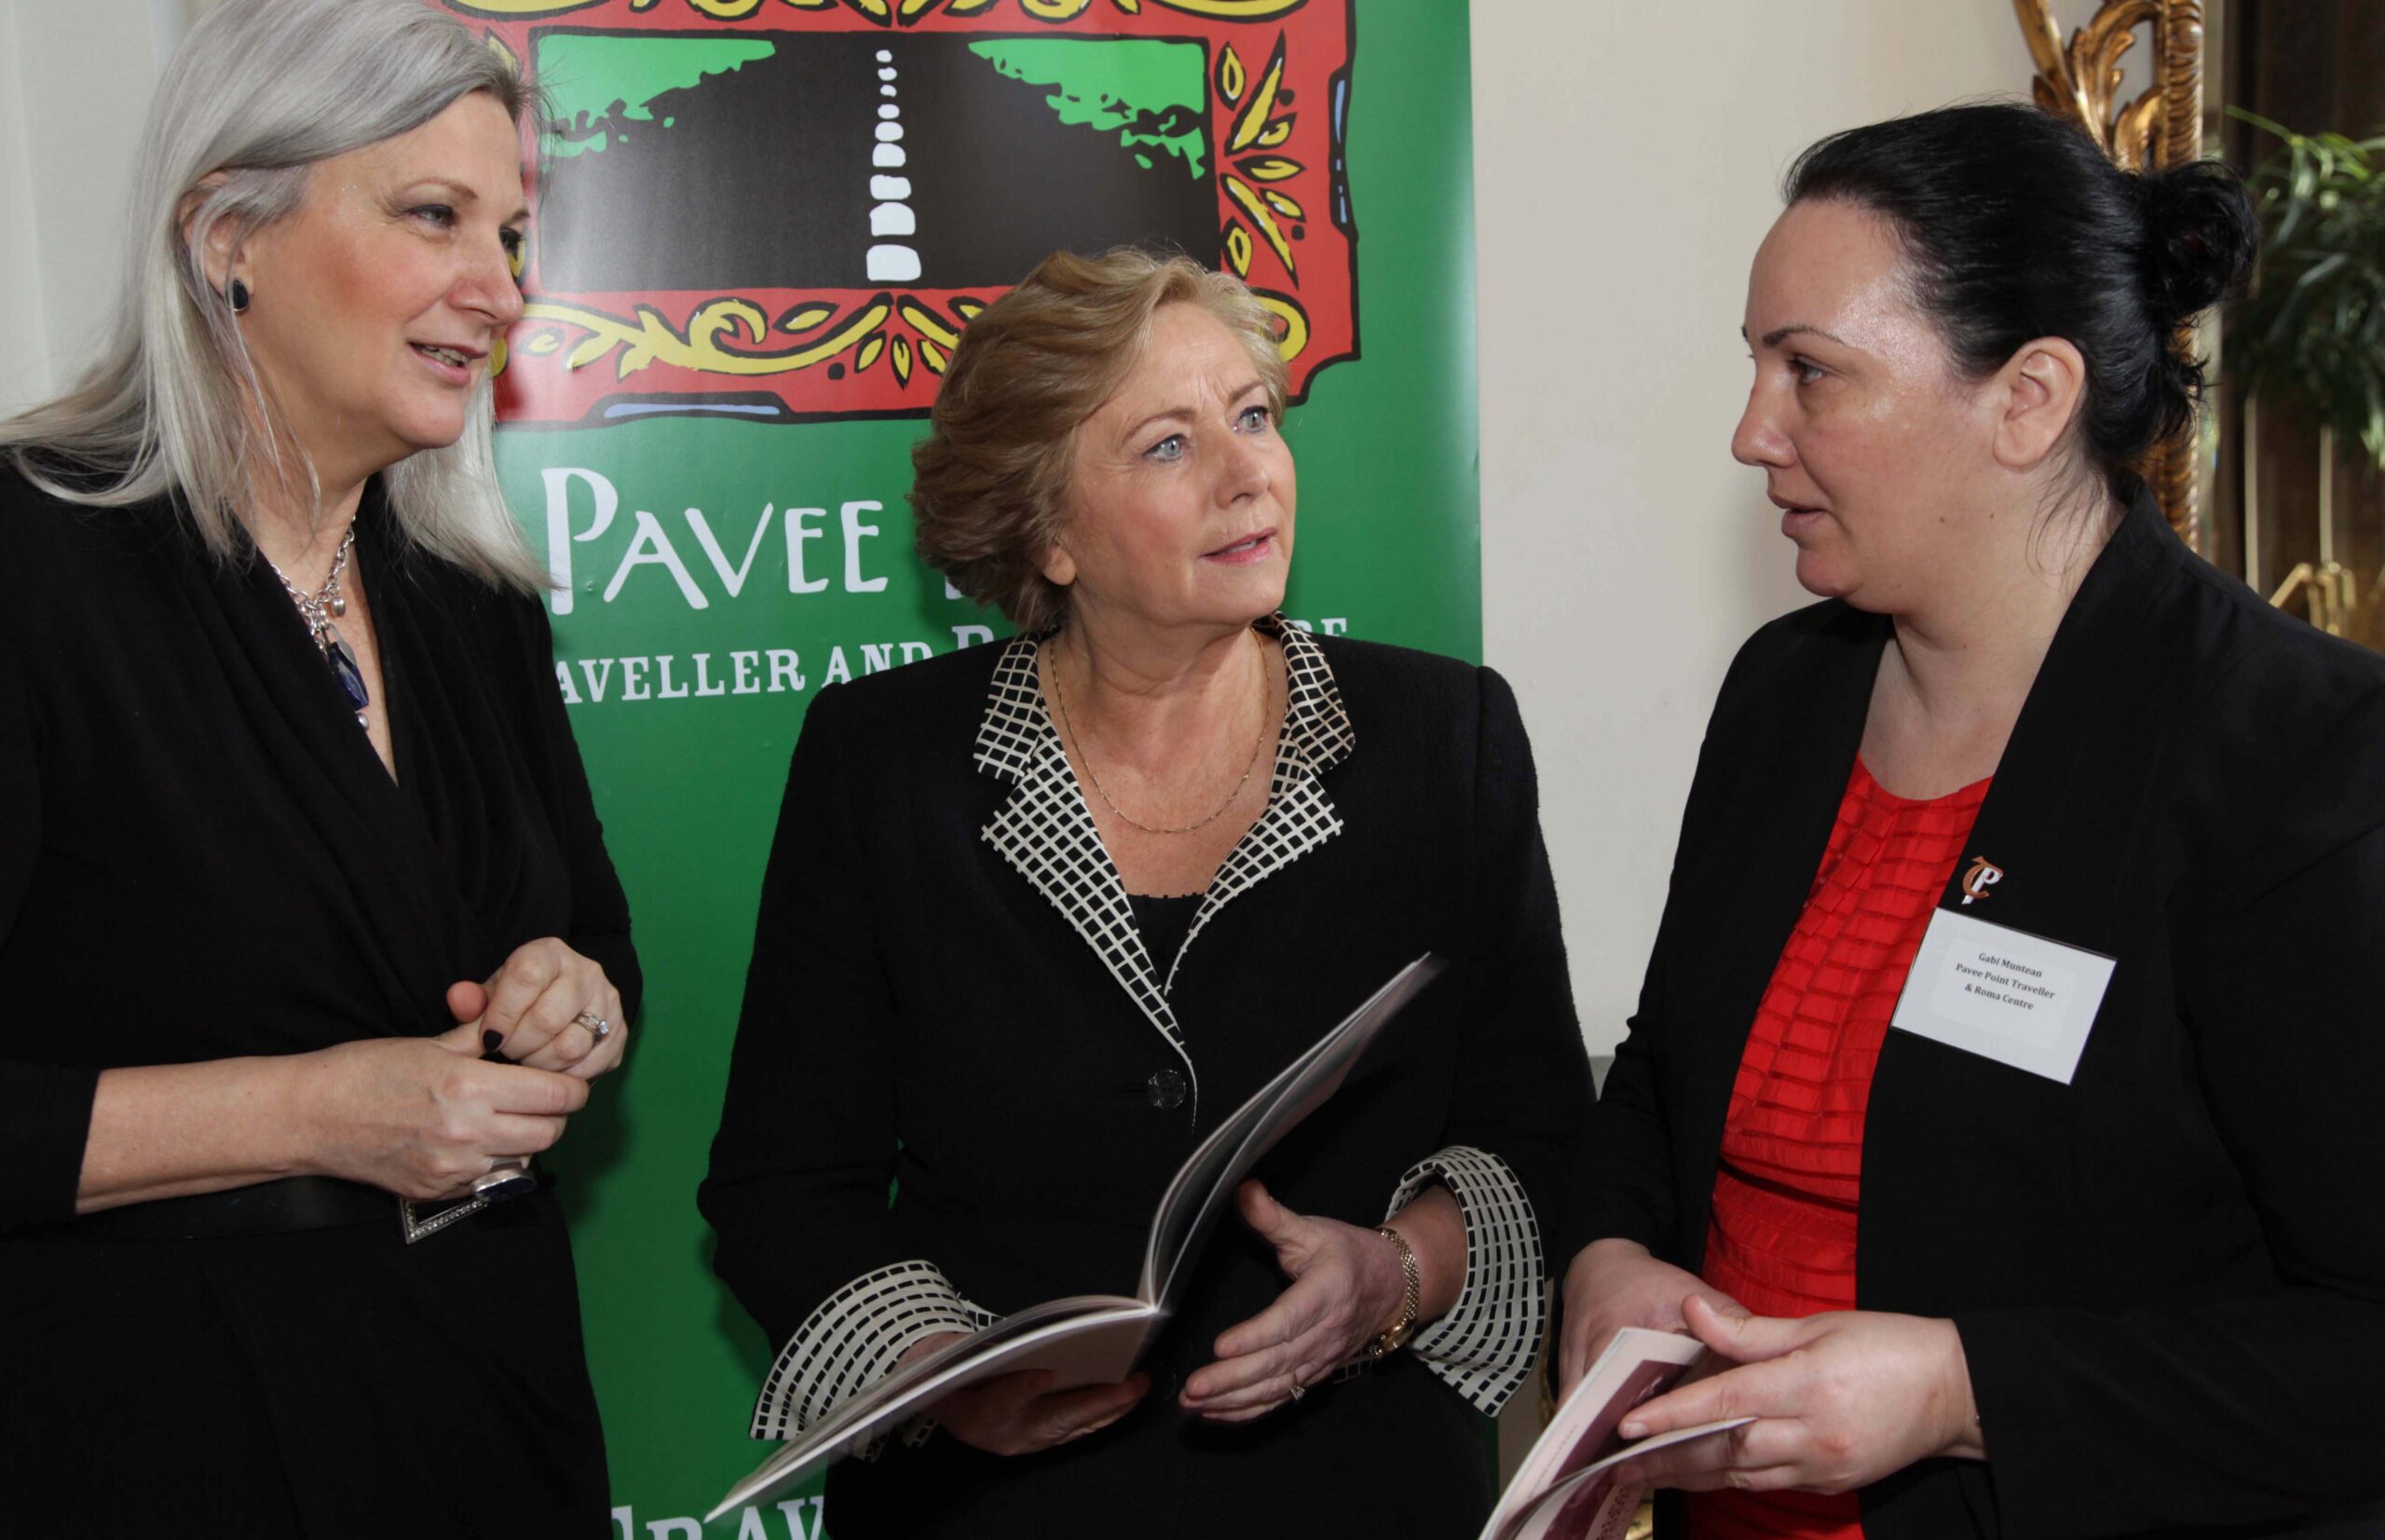 Pavee Point welcomes the setting up of a National Traveller Roma Inclusion Steering Group